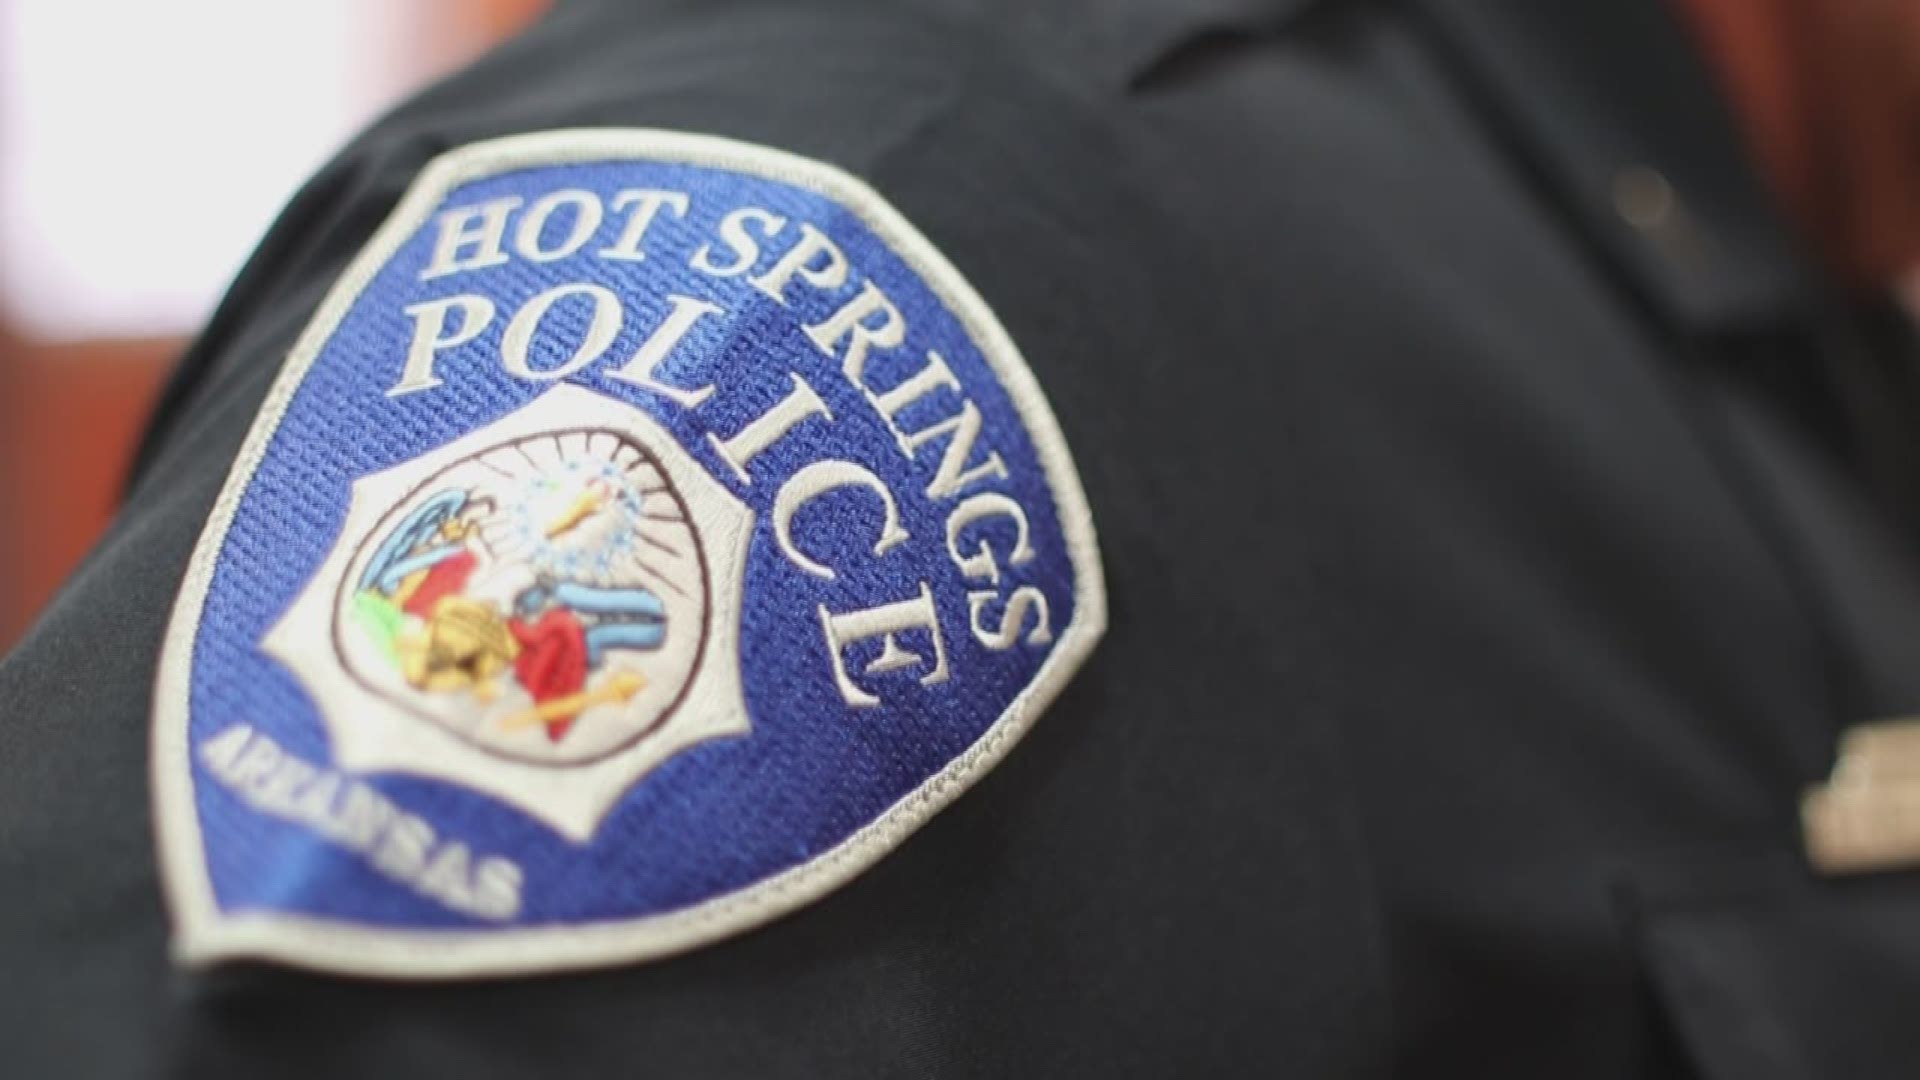 The Hot Springs Police Department posted on their Facebook page to alert the public about becoming a victim of scams after one of their own became a target.